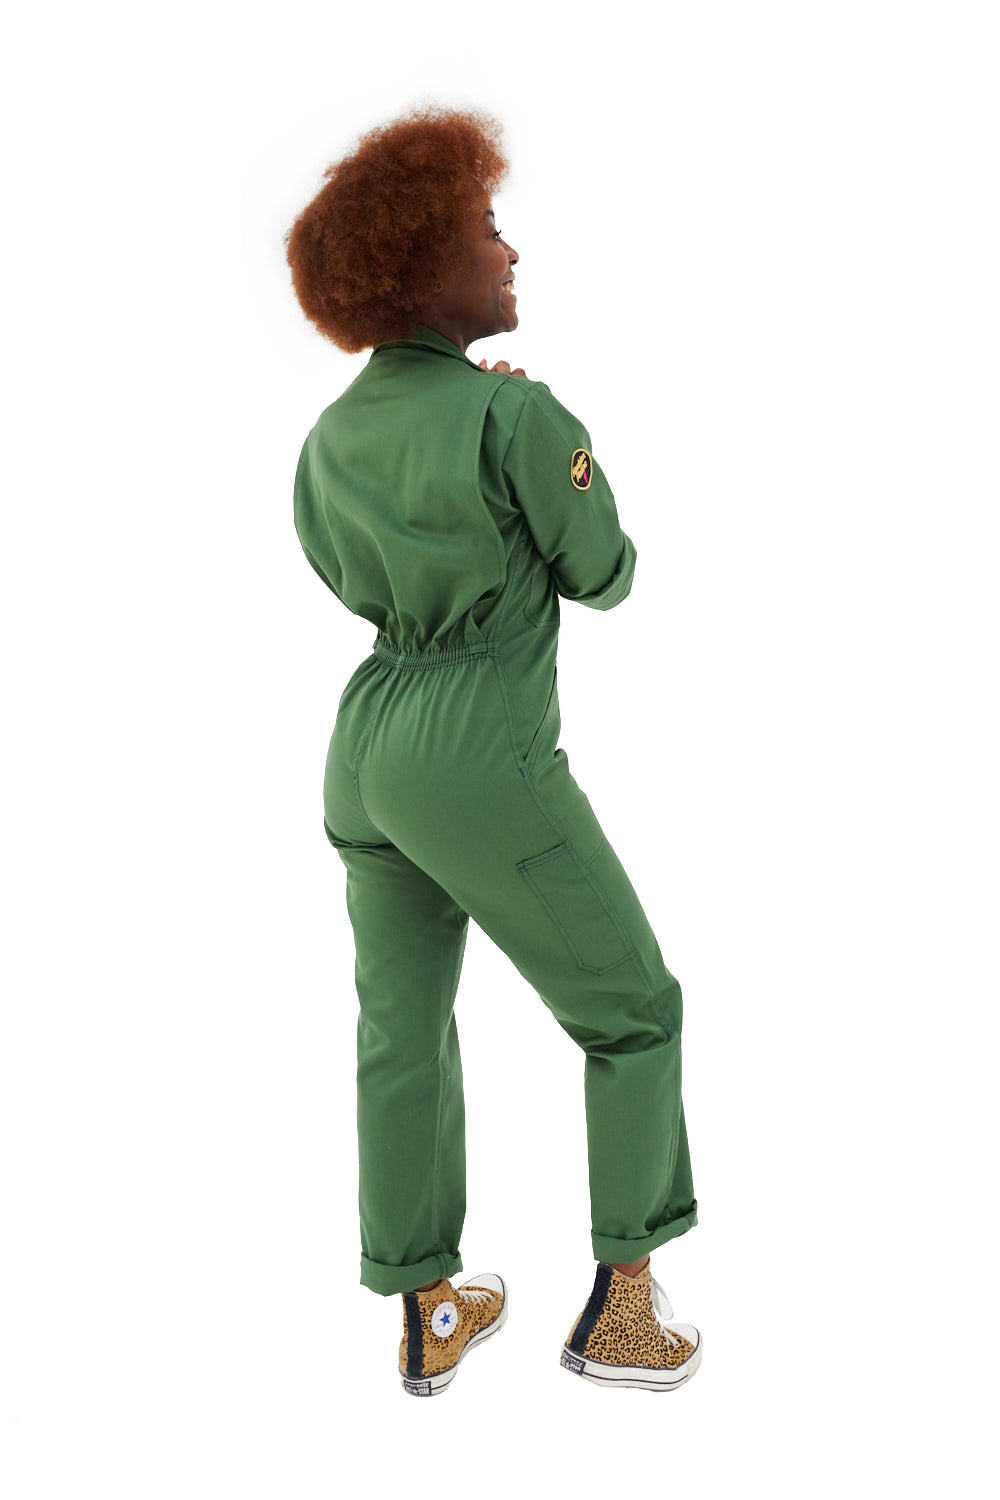 GREEN INFINITY AND BEYOND unisex jumpsuit